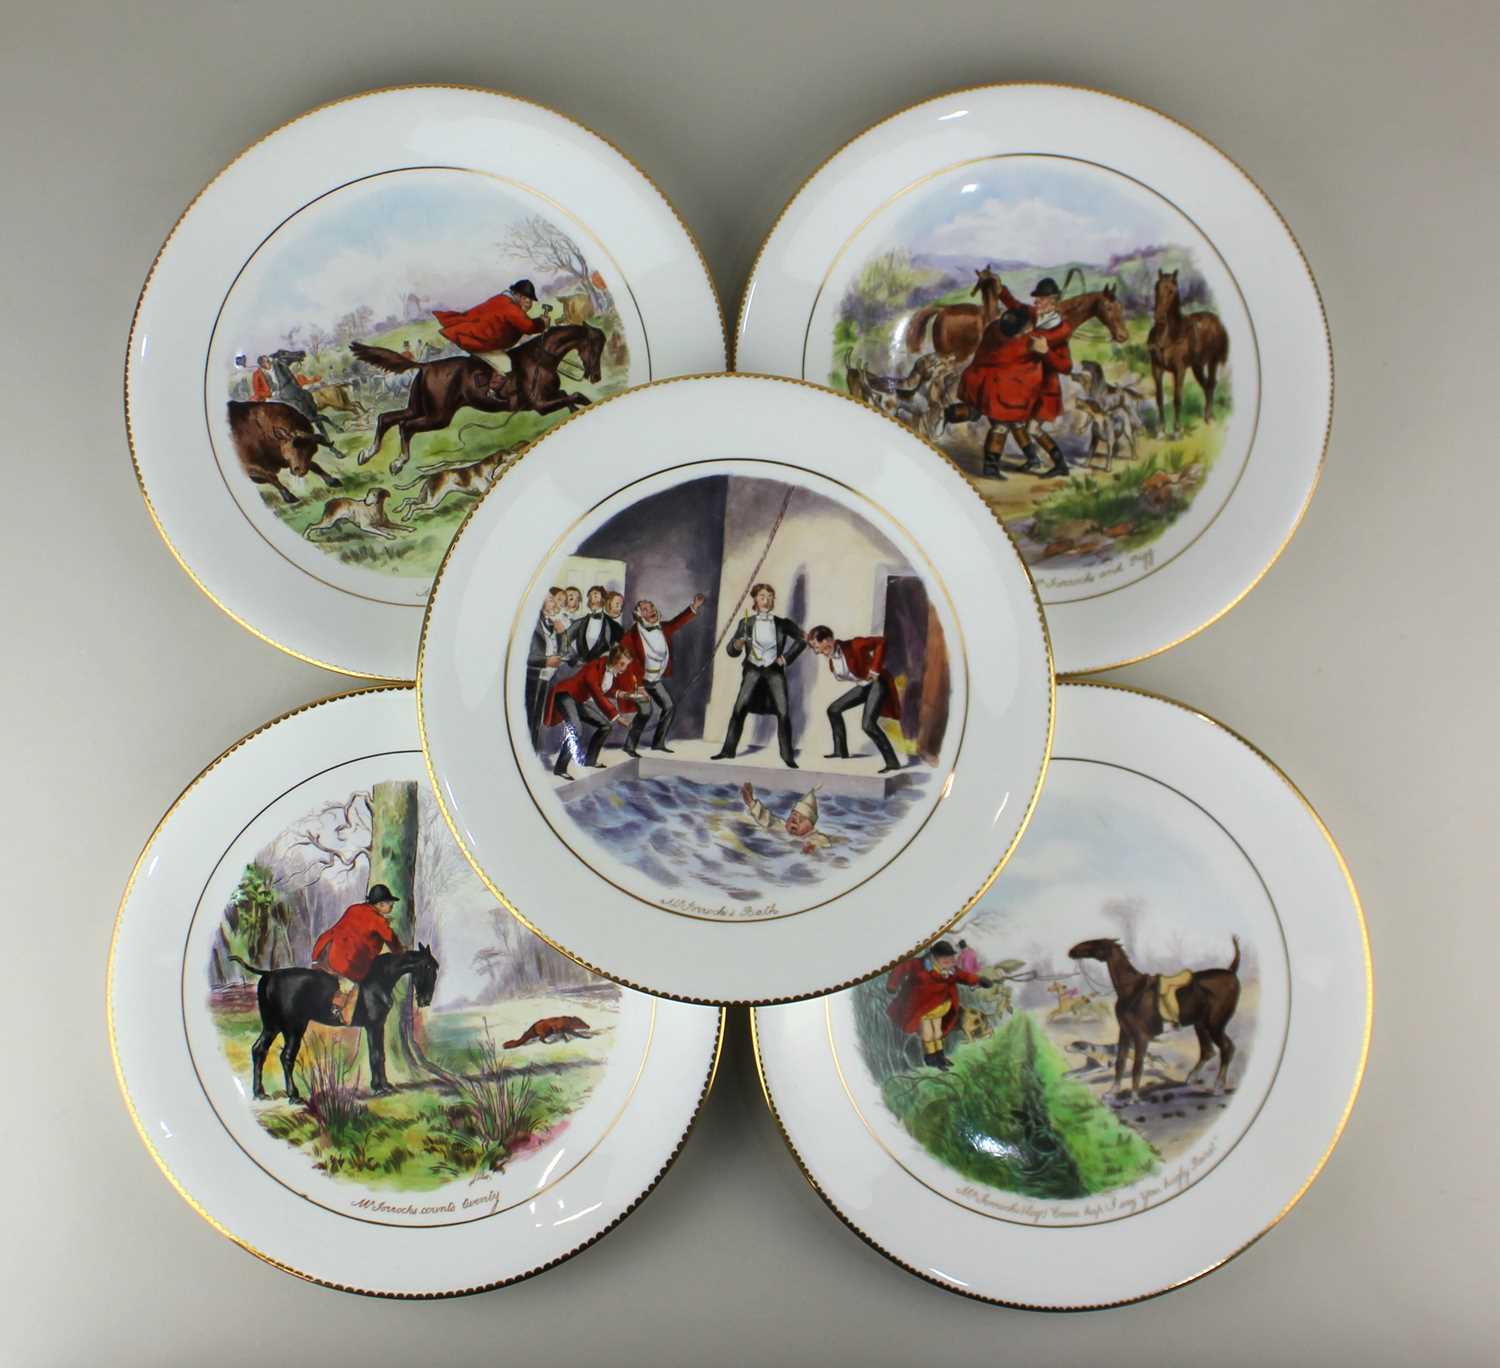 Five Wedgwood porcelain plates decorated with various scenes from Surtees' Jorrocks' Jaunts and